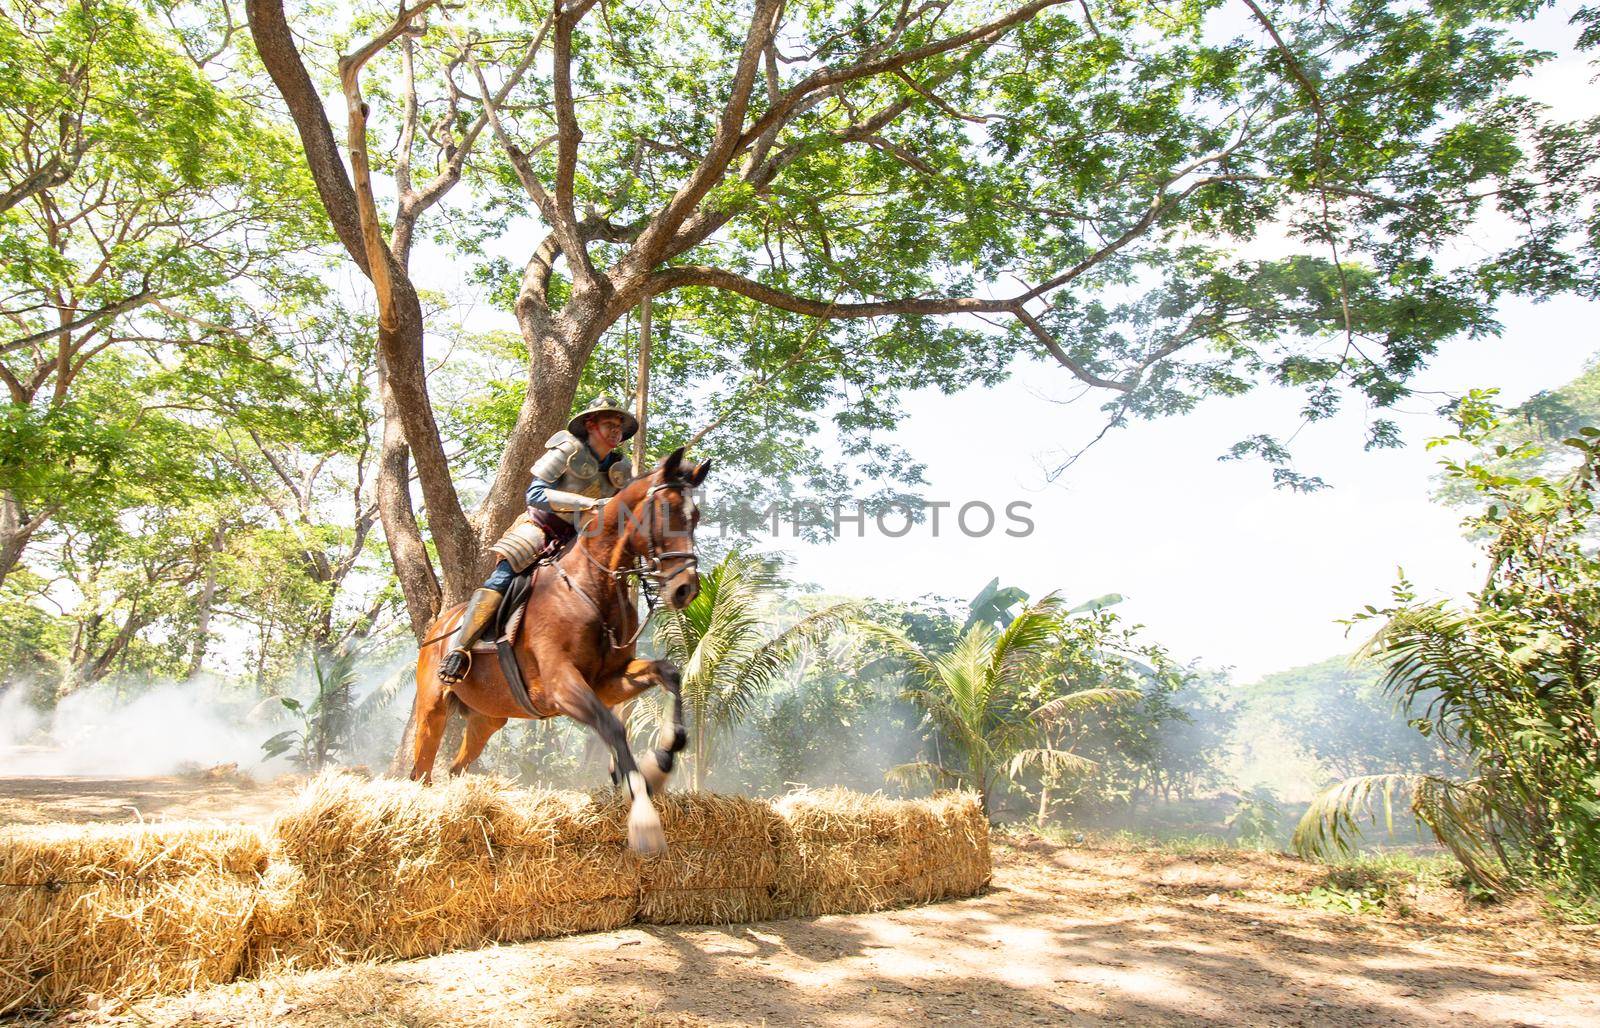 Aisan Thai soldier in the history scene with armor suit costume and horse	
